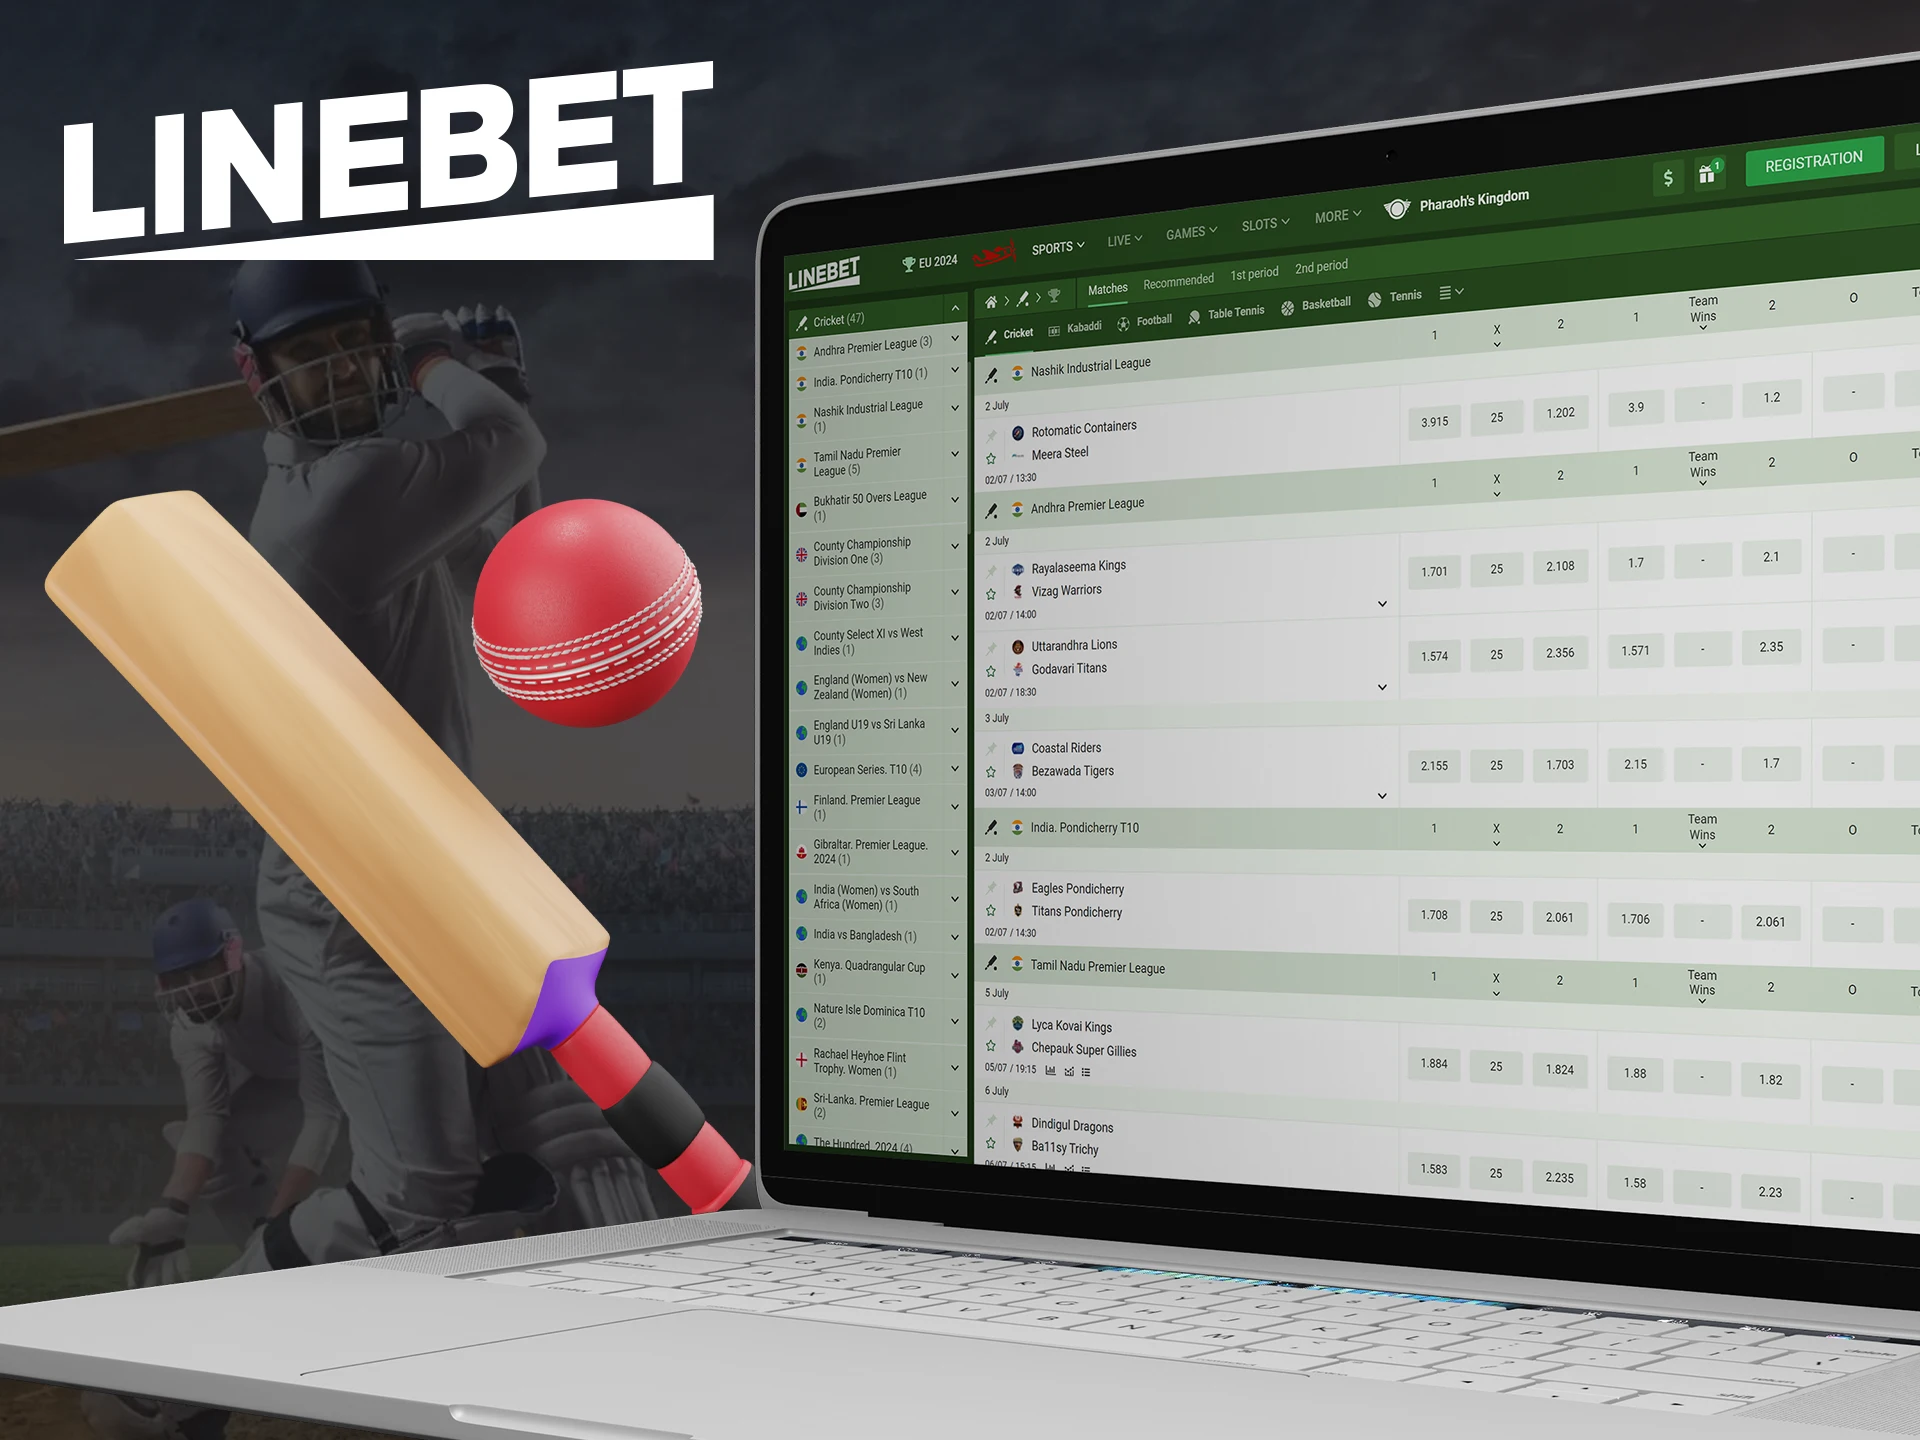 Get the most out of your cricket betting experience with Linebet.